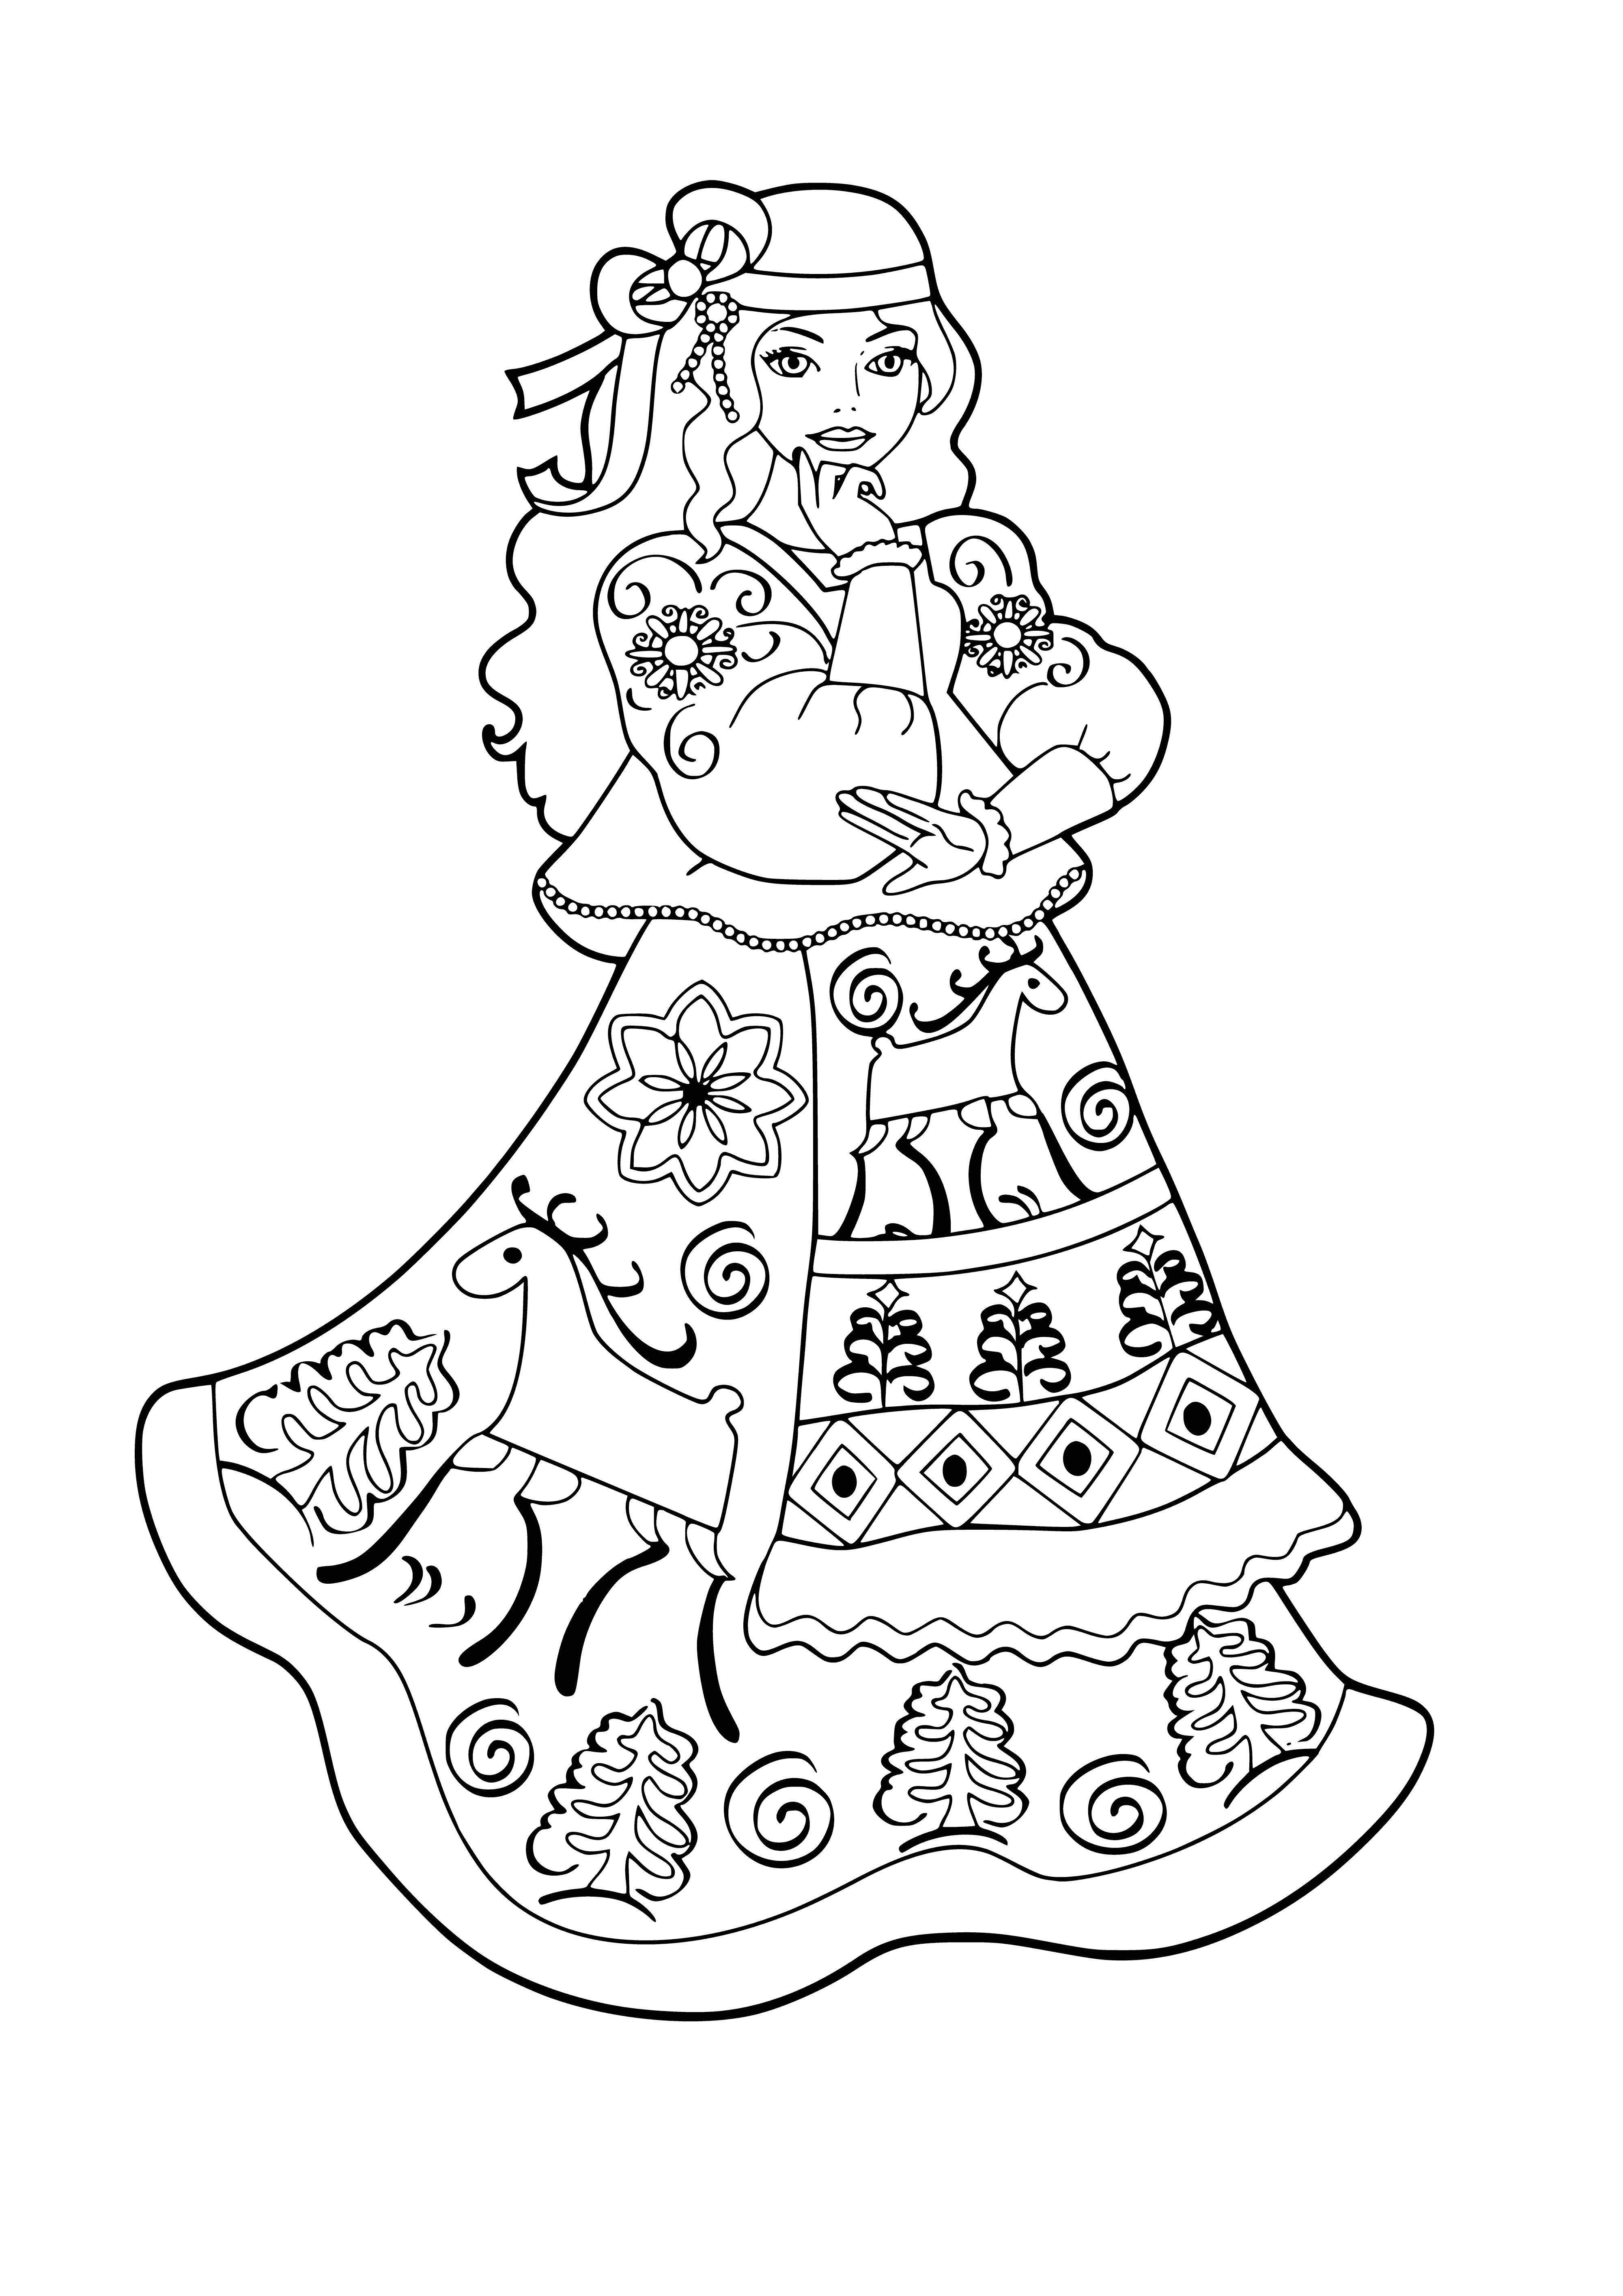 coloring page: 3 Russian beauties wearing white dresses, with oval faces, high cheekbones, dark eyes & full lips. Hair stylishly done, long necks & slender figures.